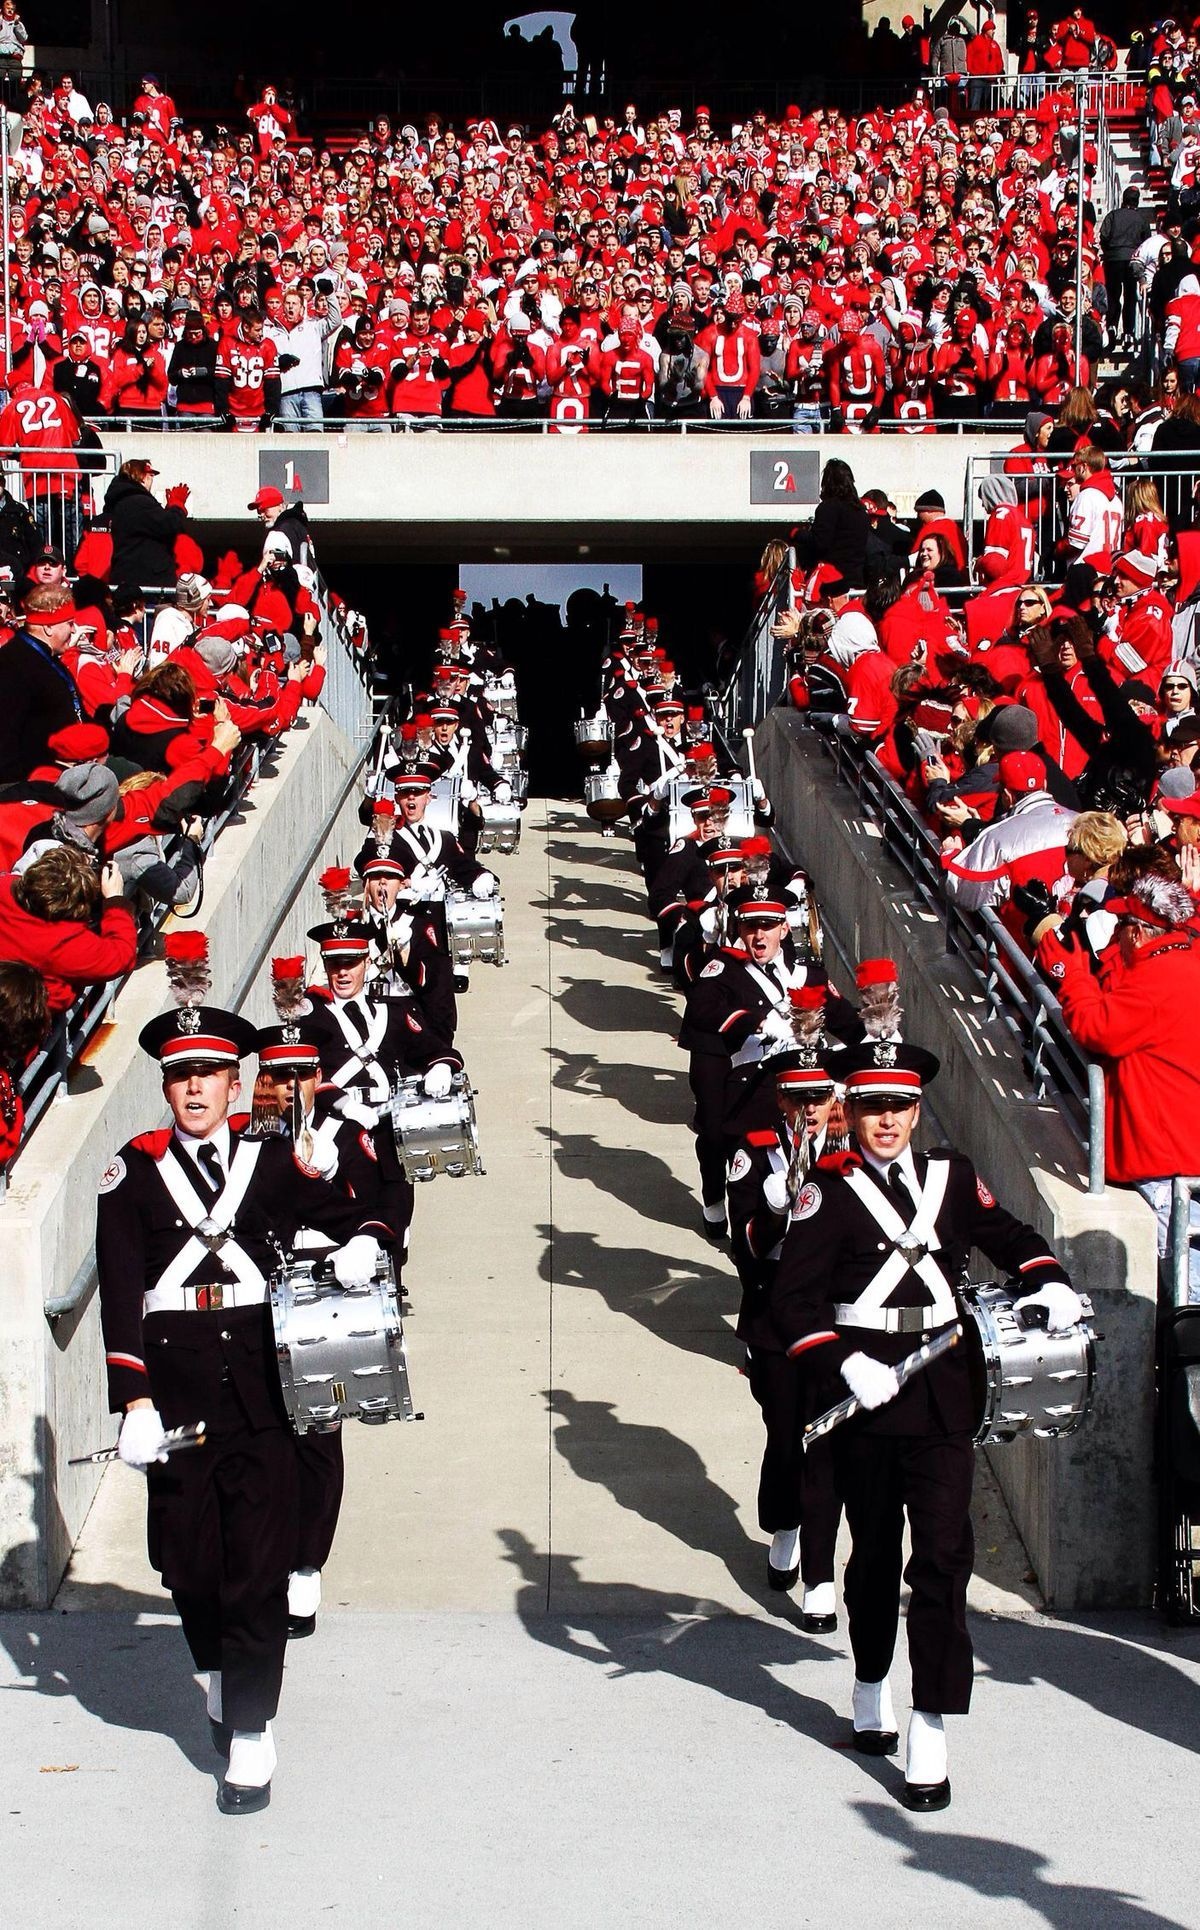 Marching Band: Ohio State, Buckeyes football team, A group of people who play music while walking, Ohio stadium. 1200x1930 HD Wallpaper.